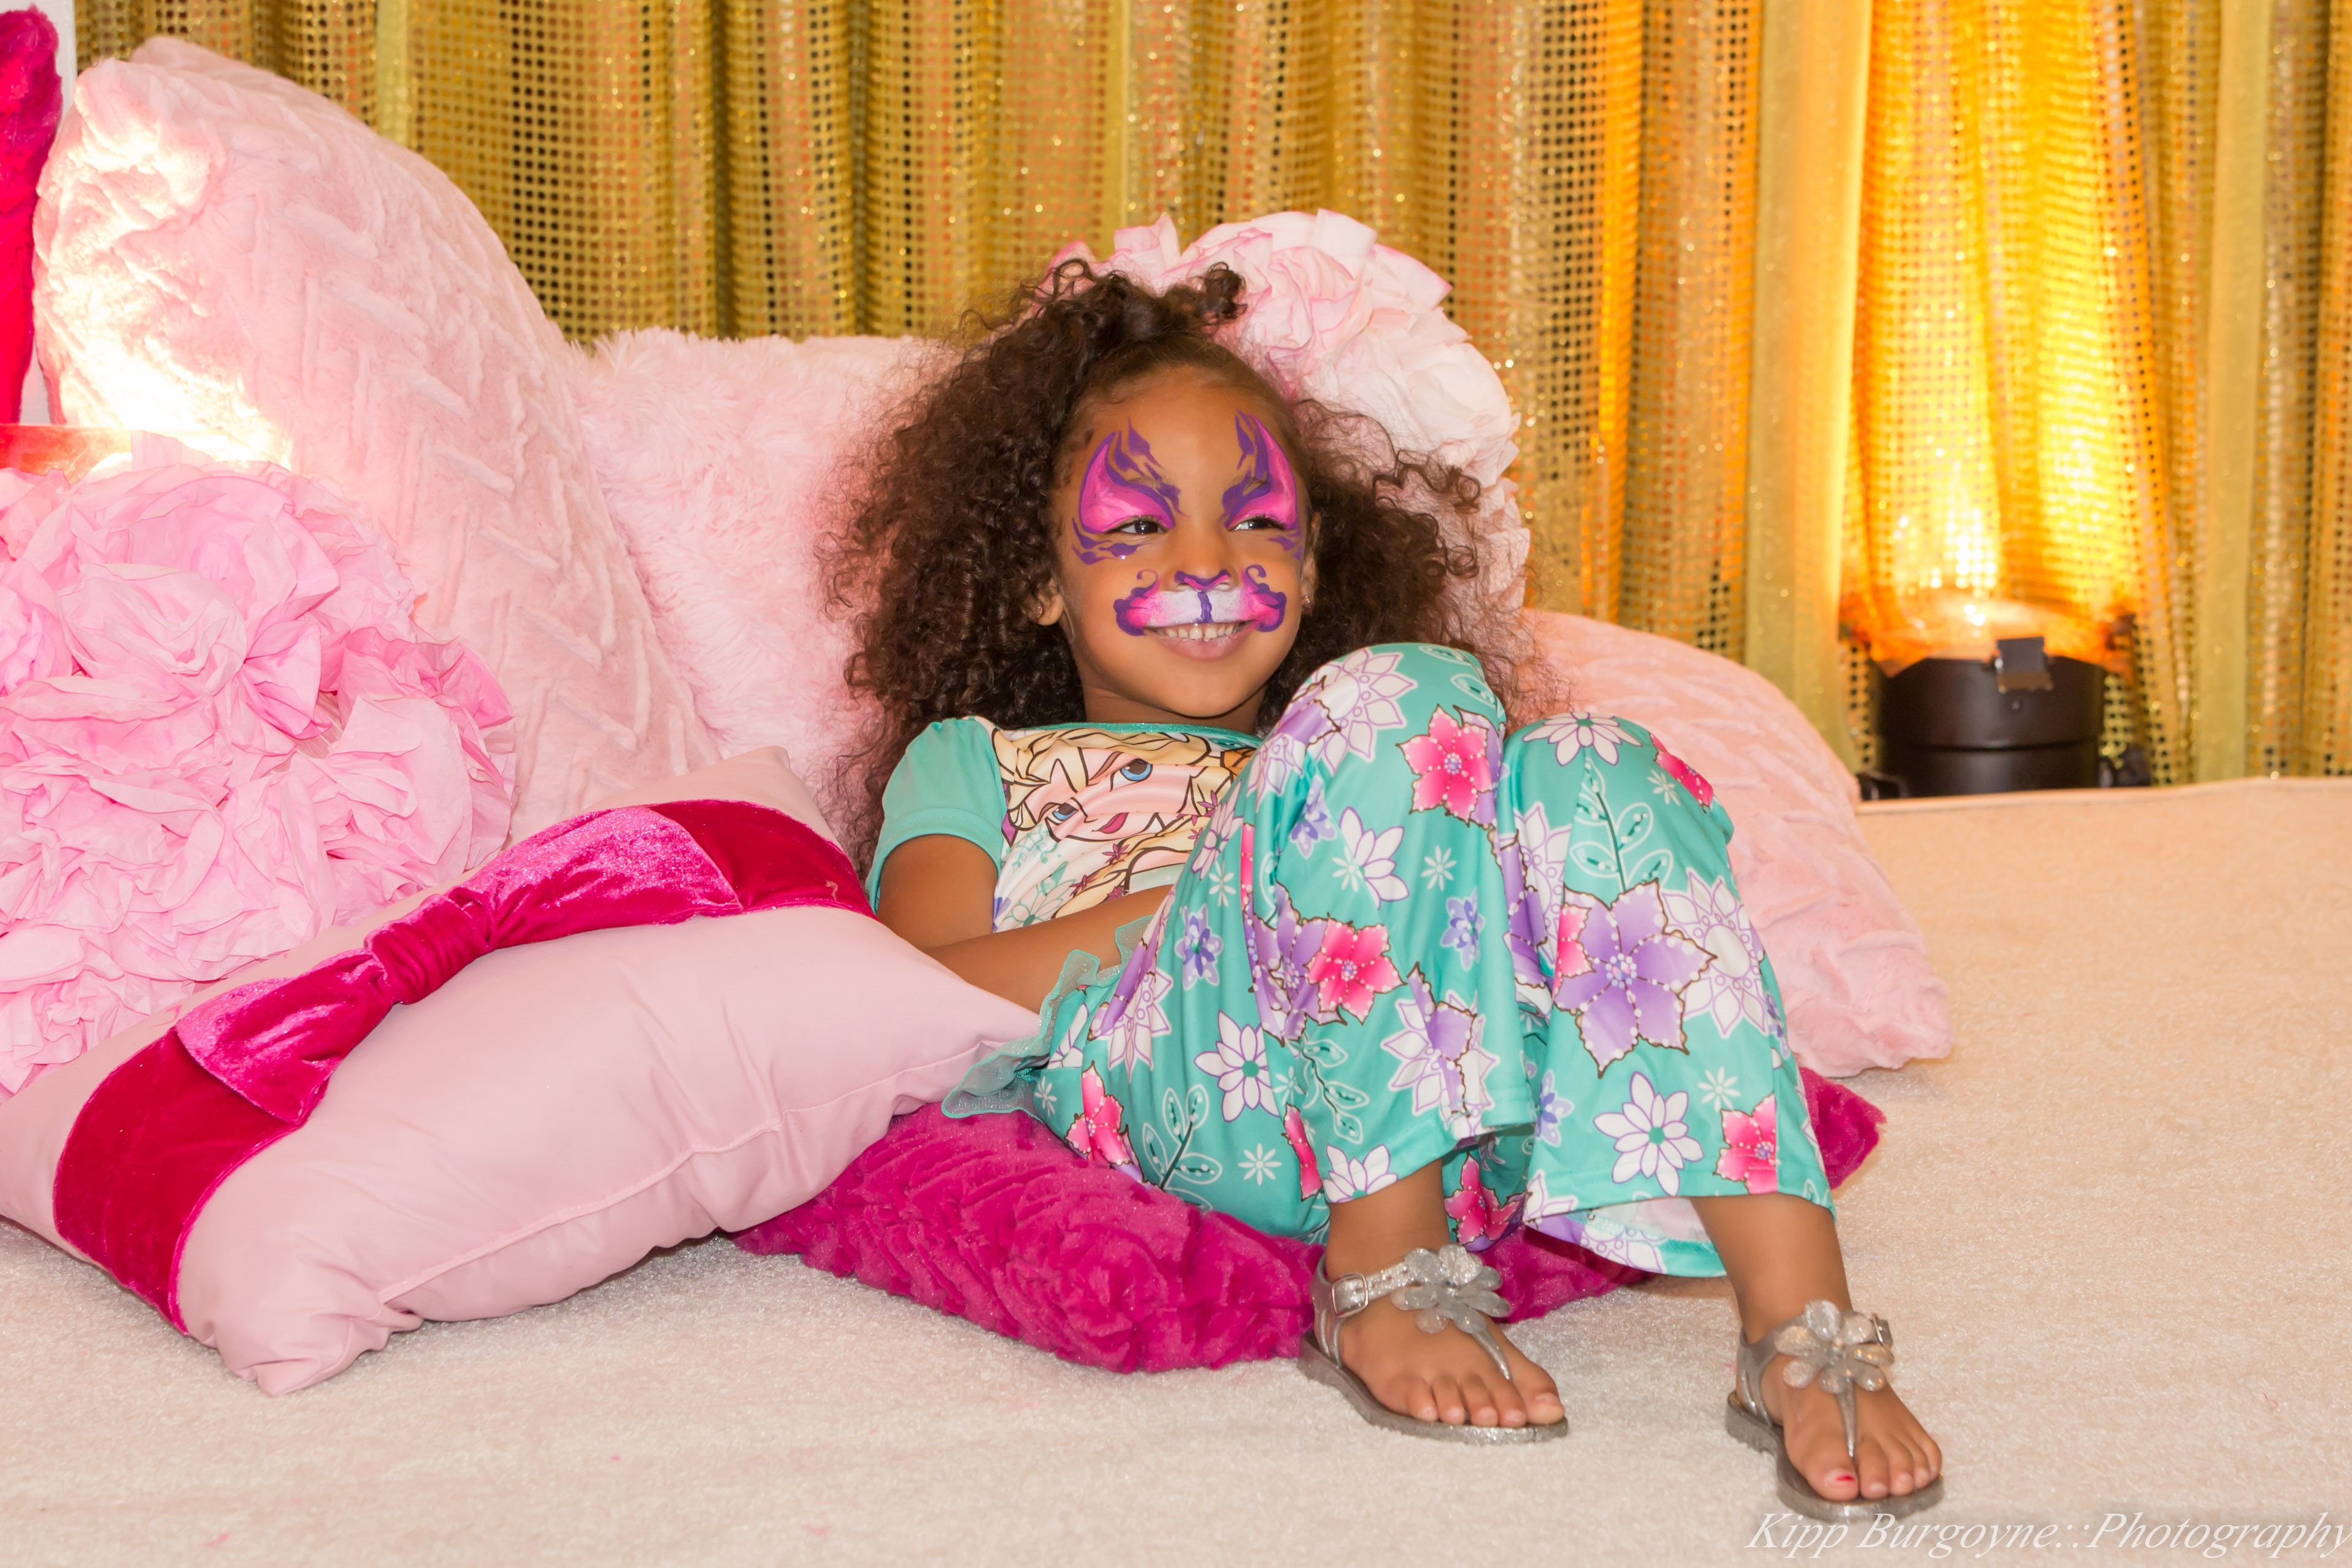 young girl with glam face paint surrounded by plush pillows wearing pajamas 